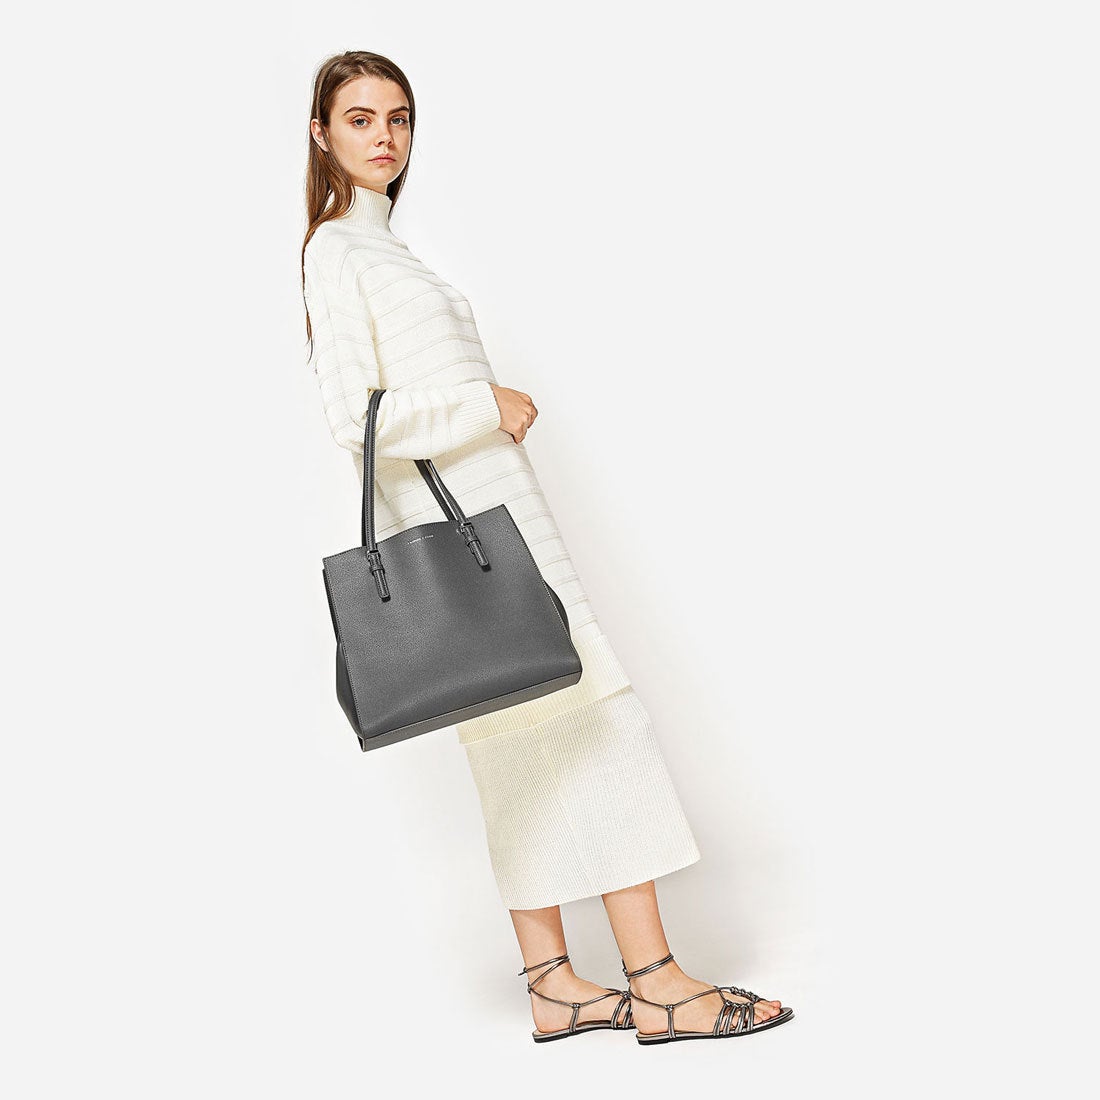 CHARLES & KEITH 【再入荷】ストラクチャートートバッグ / STRUCTURE 